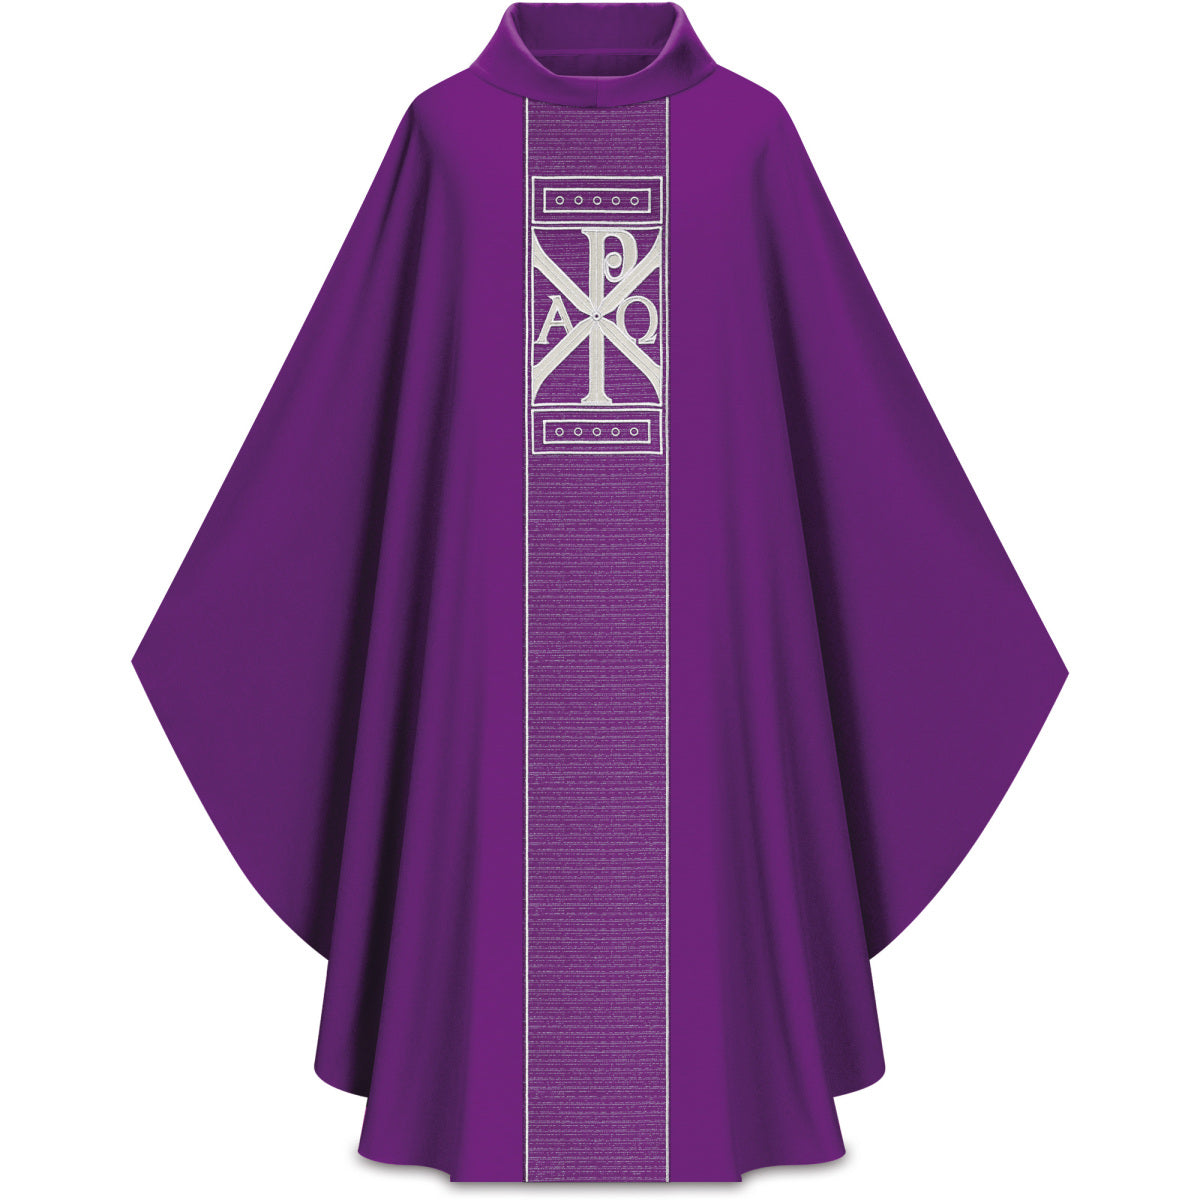 Priest Chasuble | Alpha Omega and Chi Rho